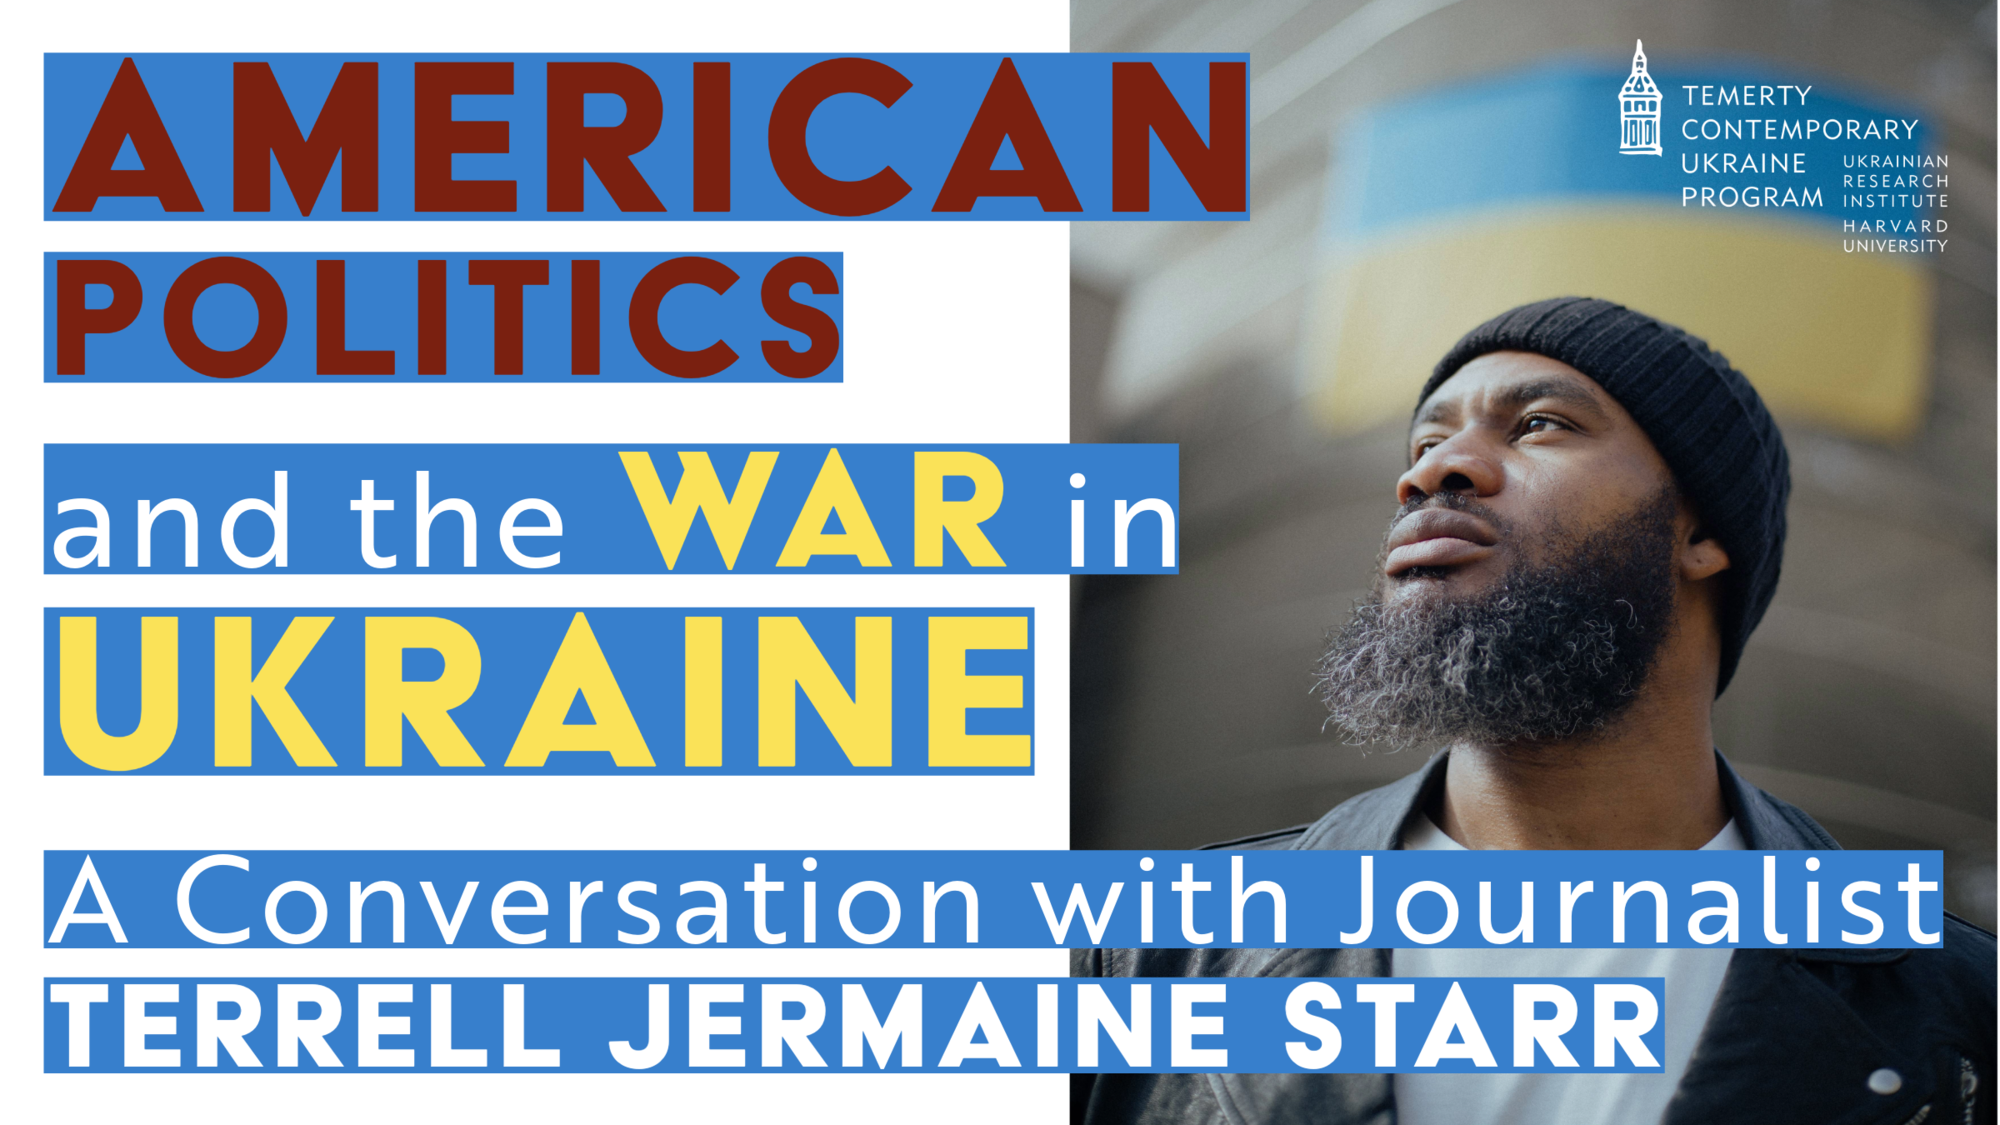 American Politics and the War in Ukraine: A Conversation with Terrell Jermaine Starr